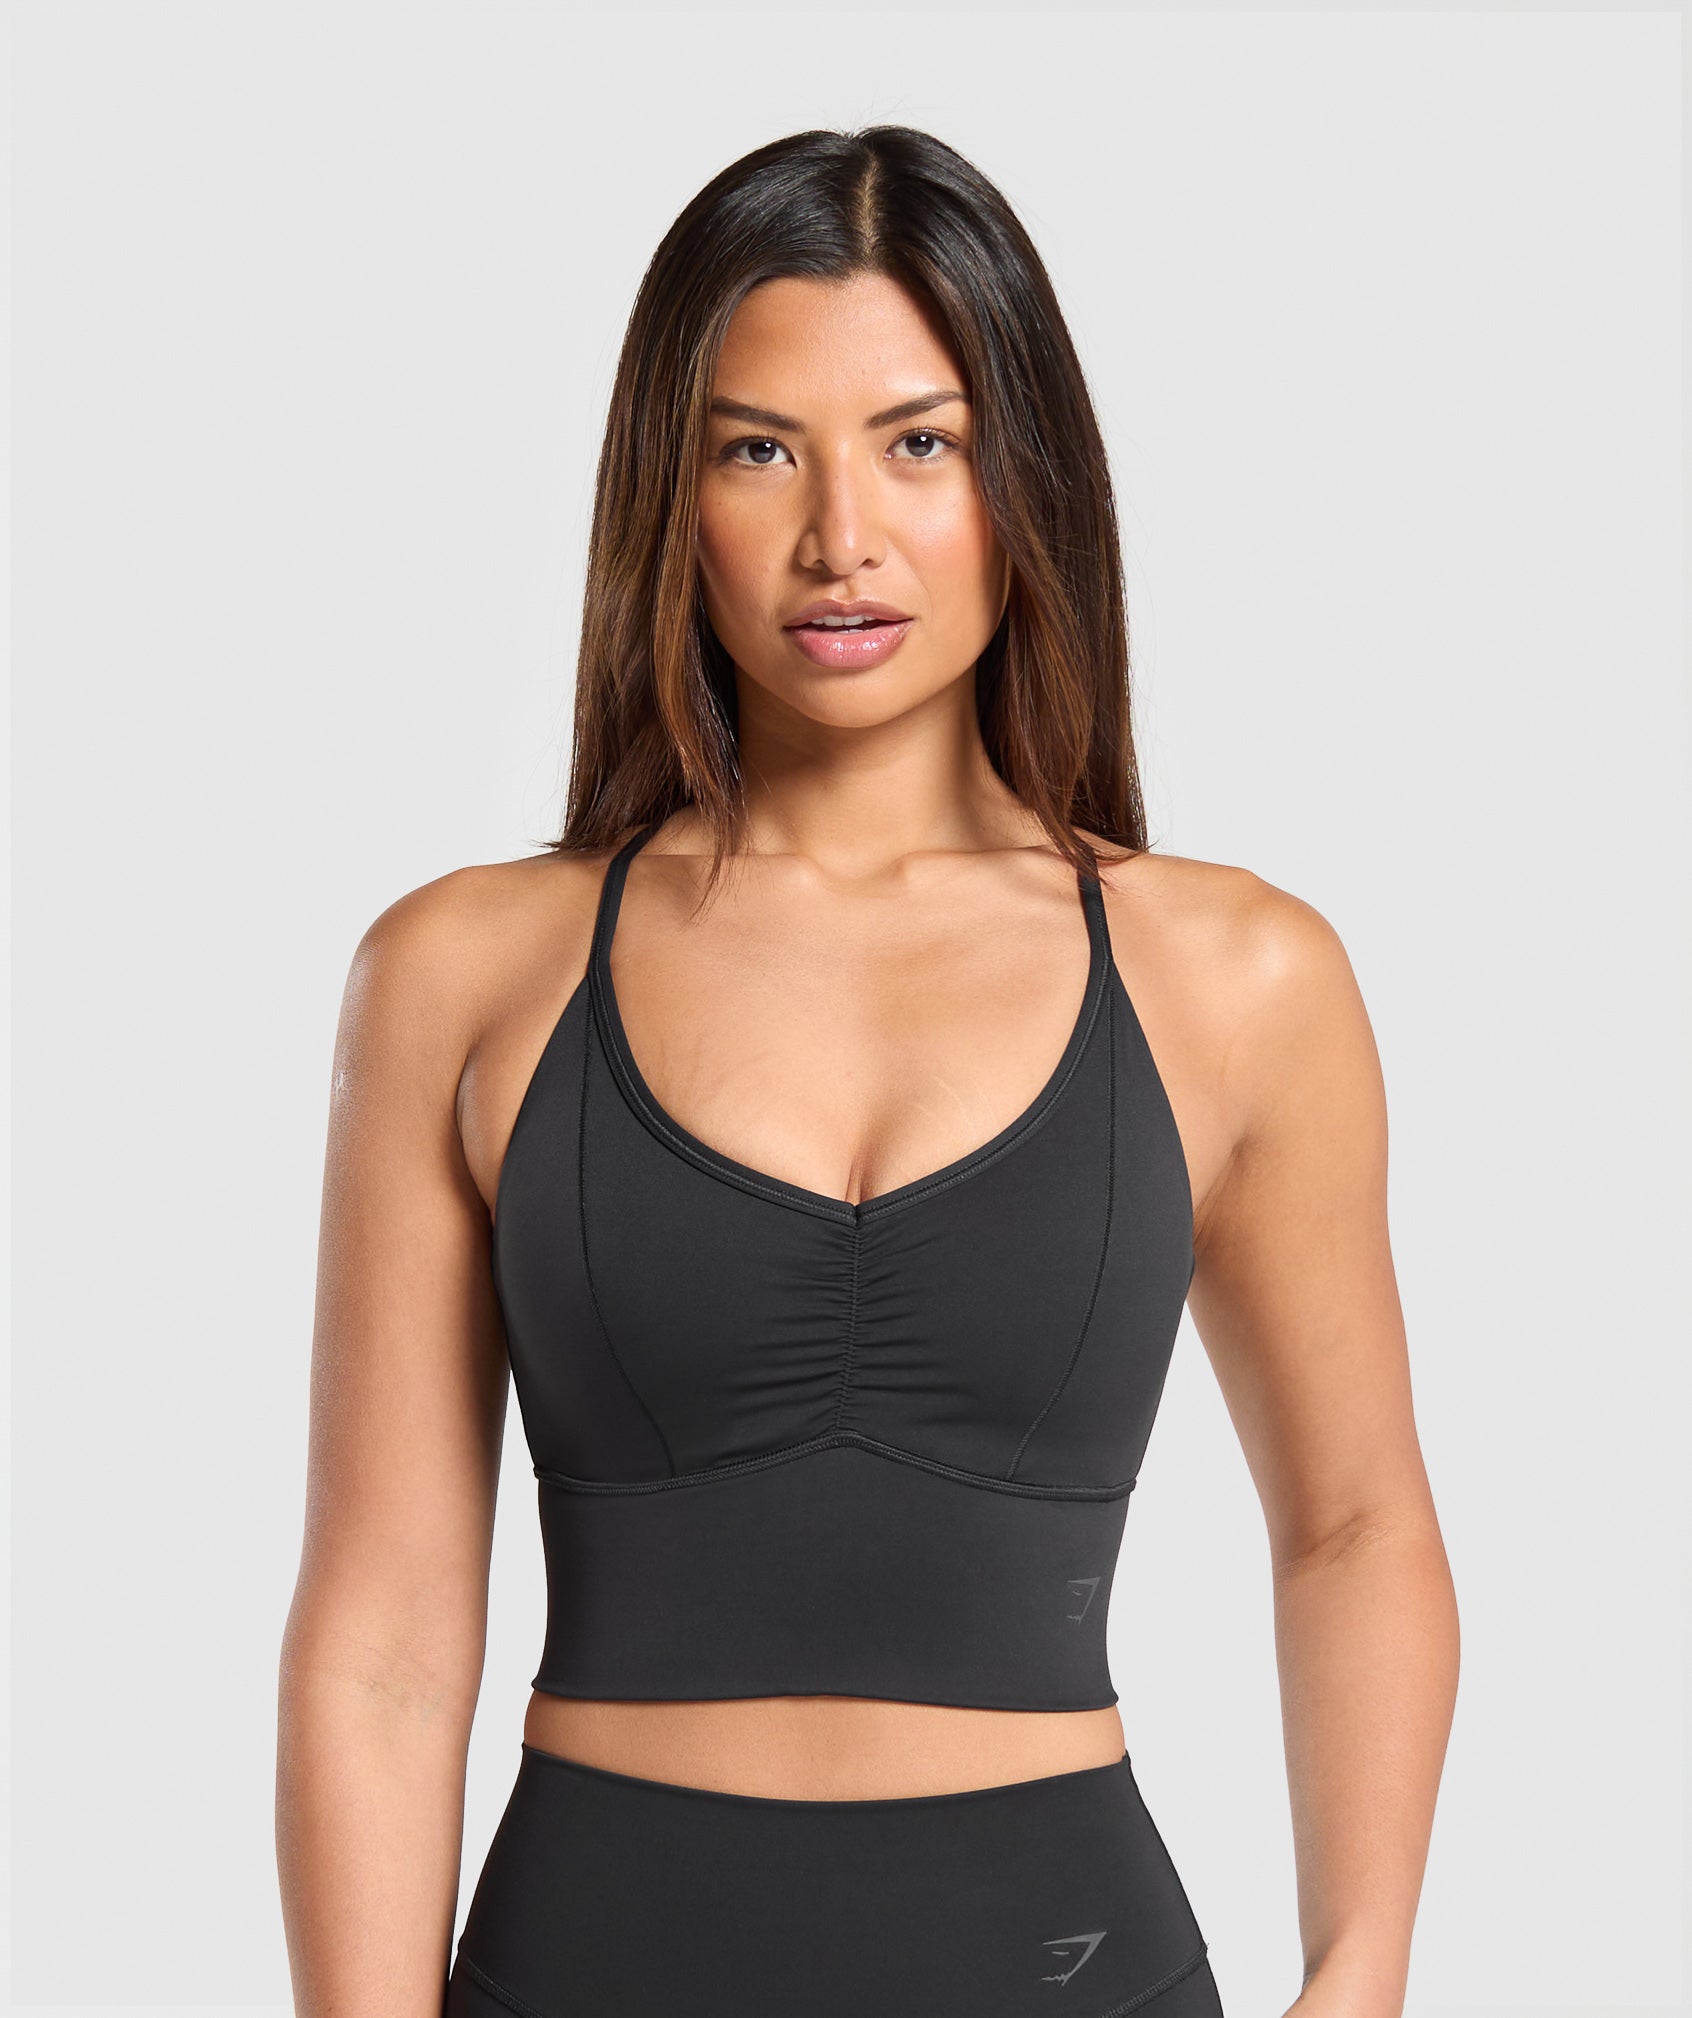 Elevate Longline Sports Bra in Black is out of stock